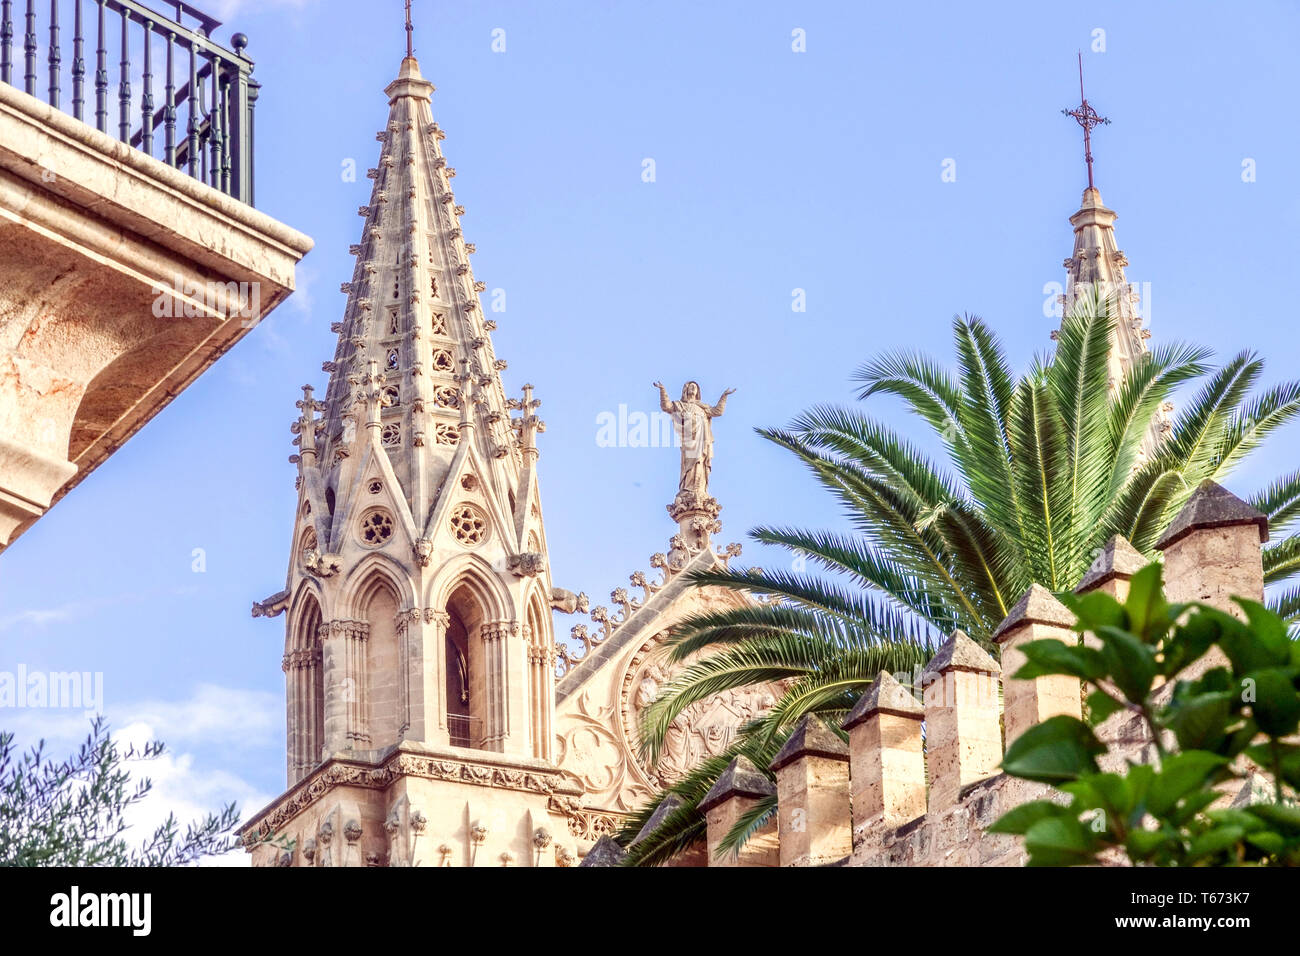 Virgin Mary statue on top of Cathedral La Seu, Palma de Mallorca Cathedral Spain Europe Stock Photo